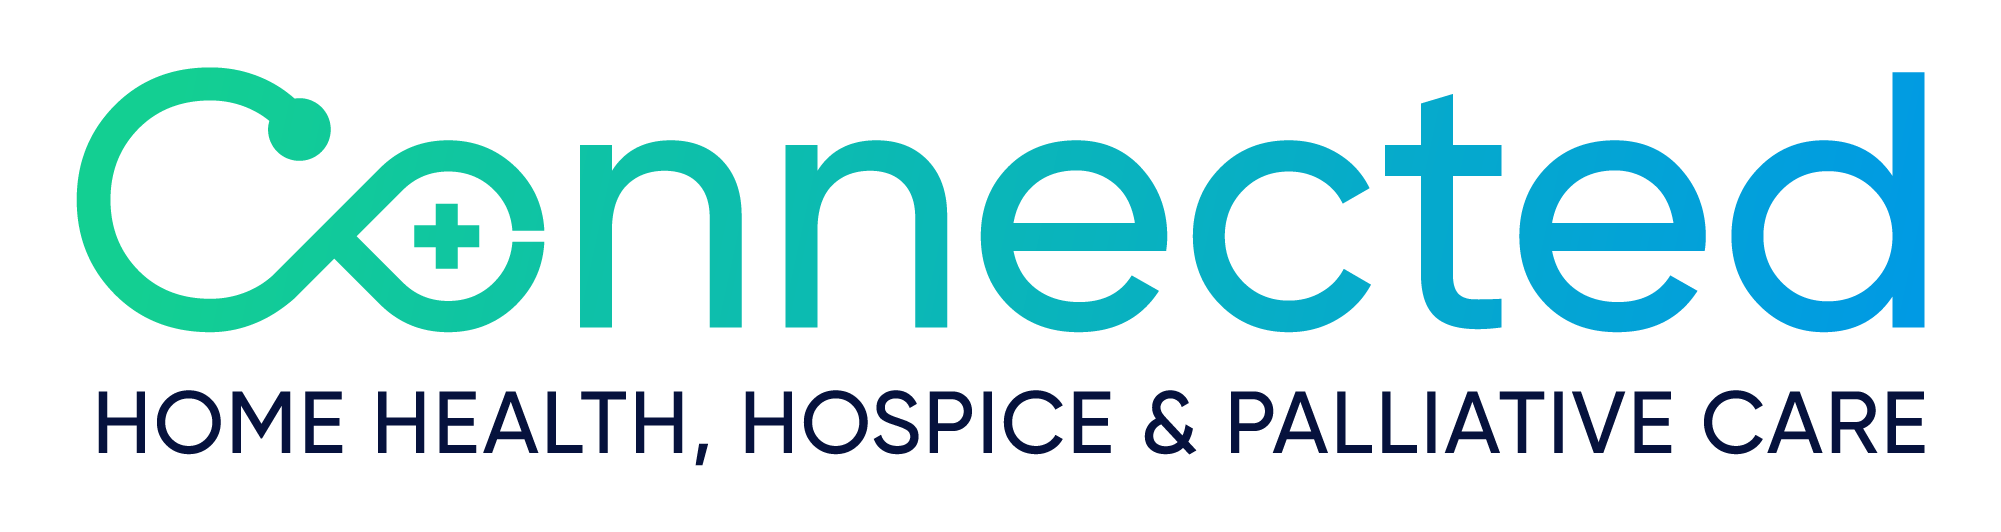 Connected Home Health, Hospice and Palliative Care logo